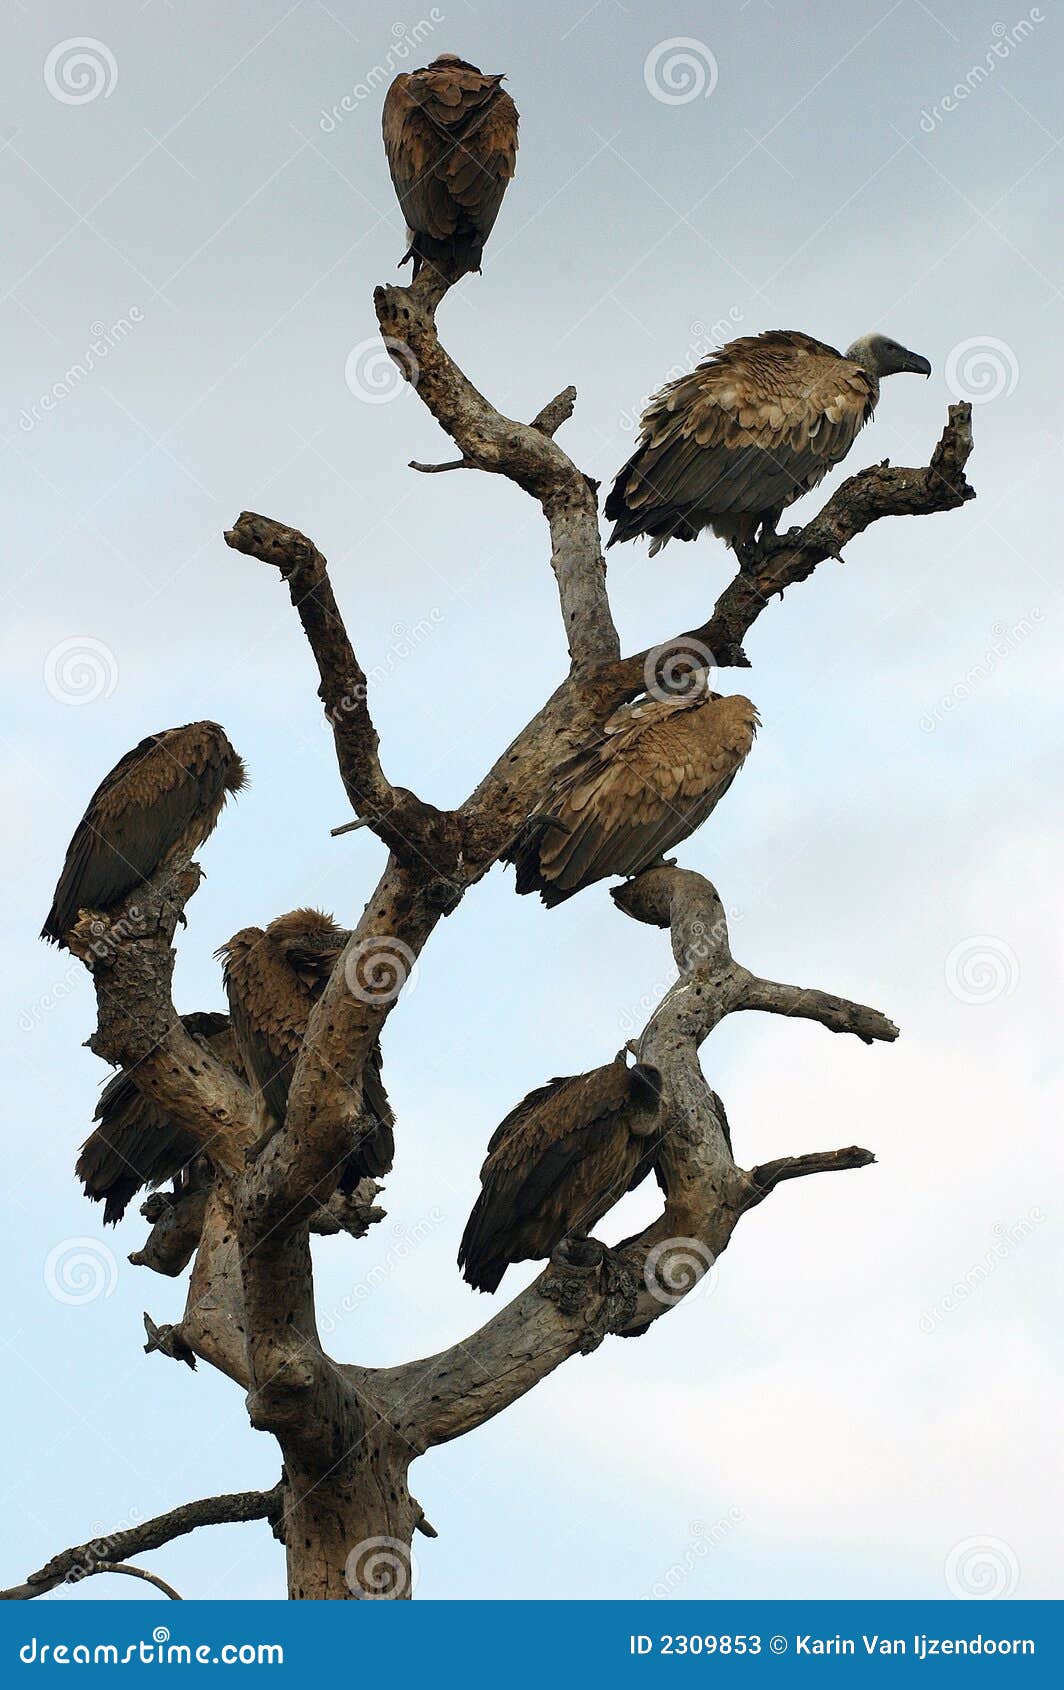 whitebacked vultures in tree